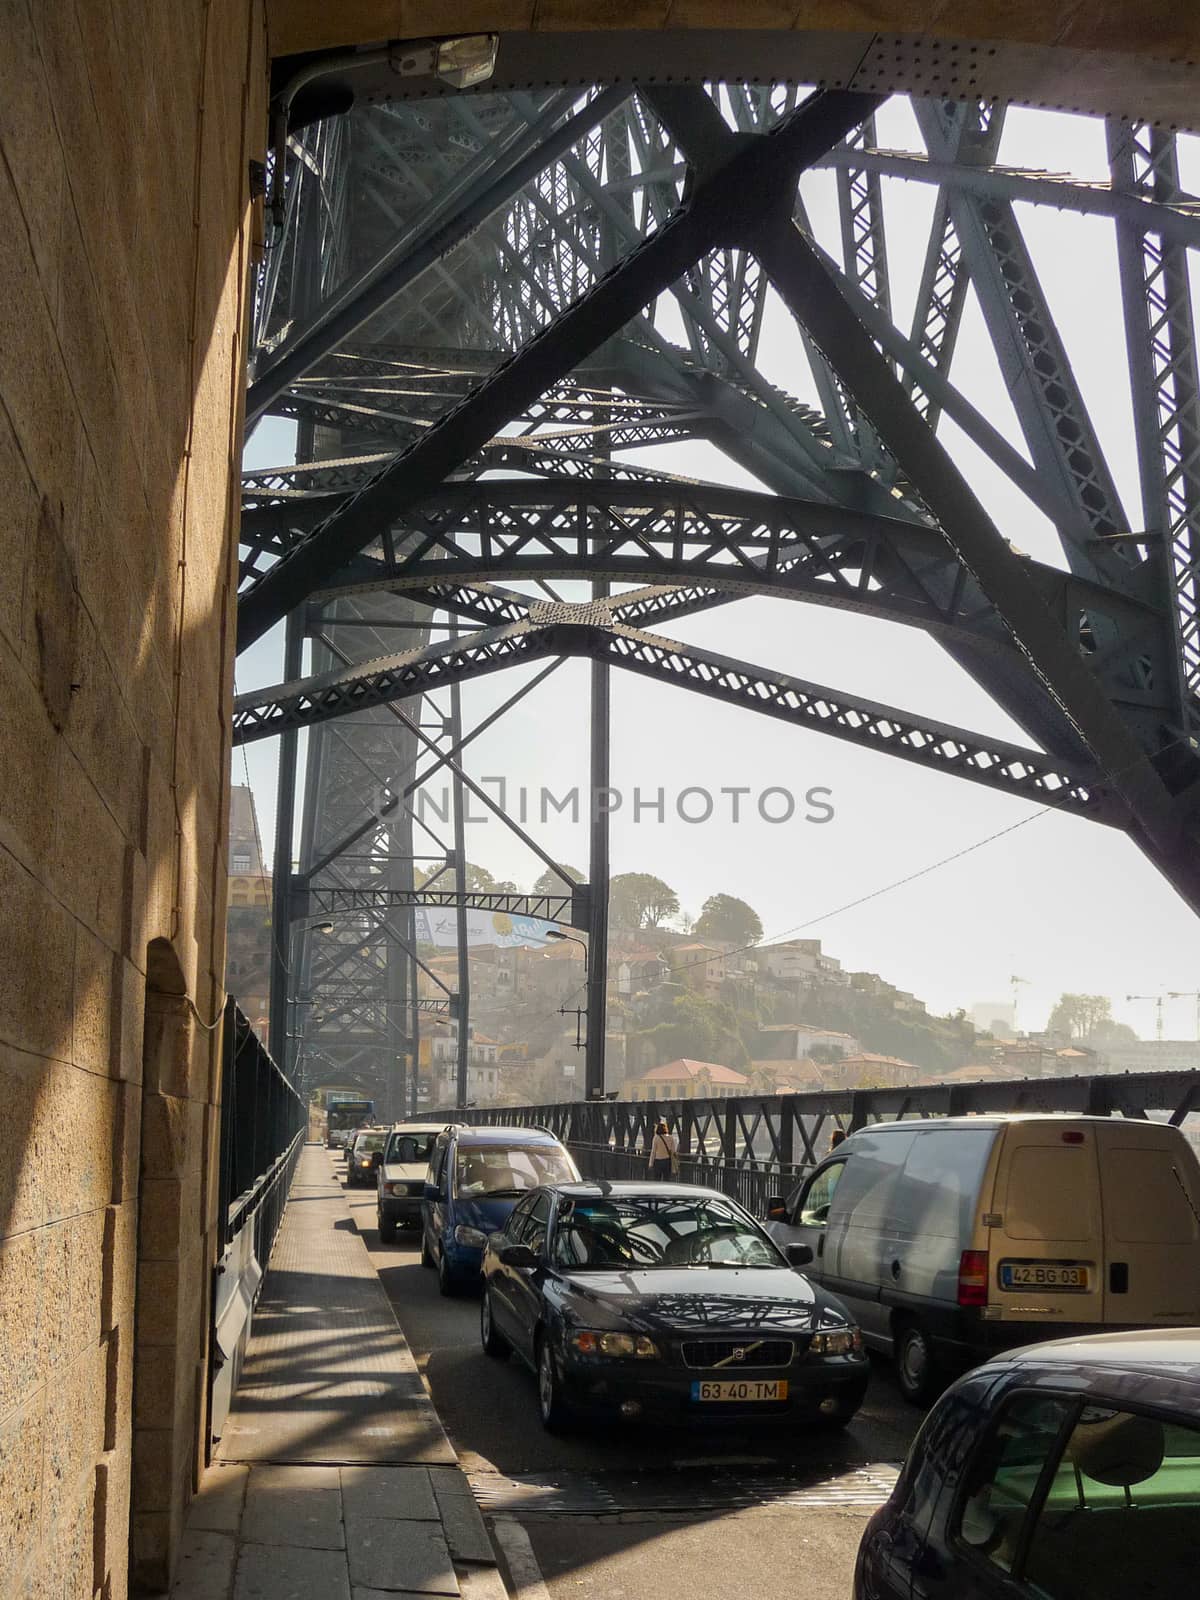 Porto, Portugal, October 2010: Traffic on the famous Dom Luis I Bridge over river Douro on Porto, Portugal during rush hour.